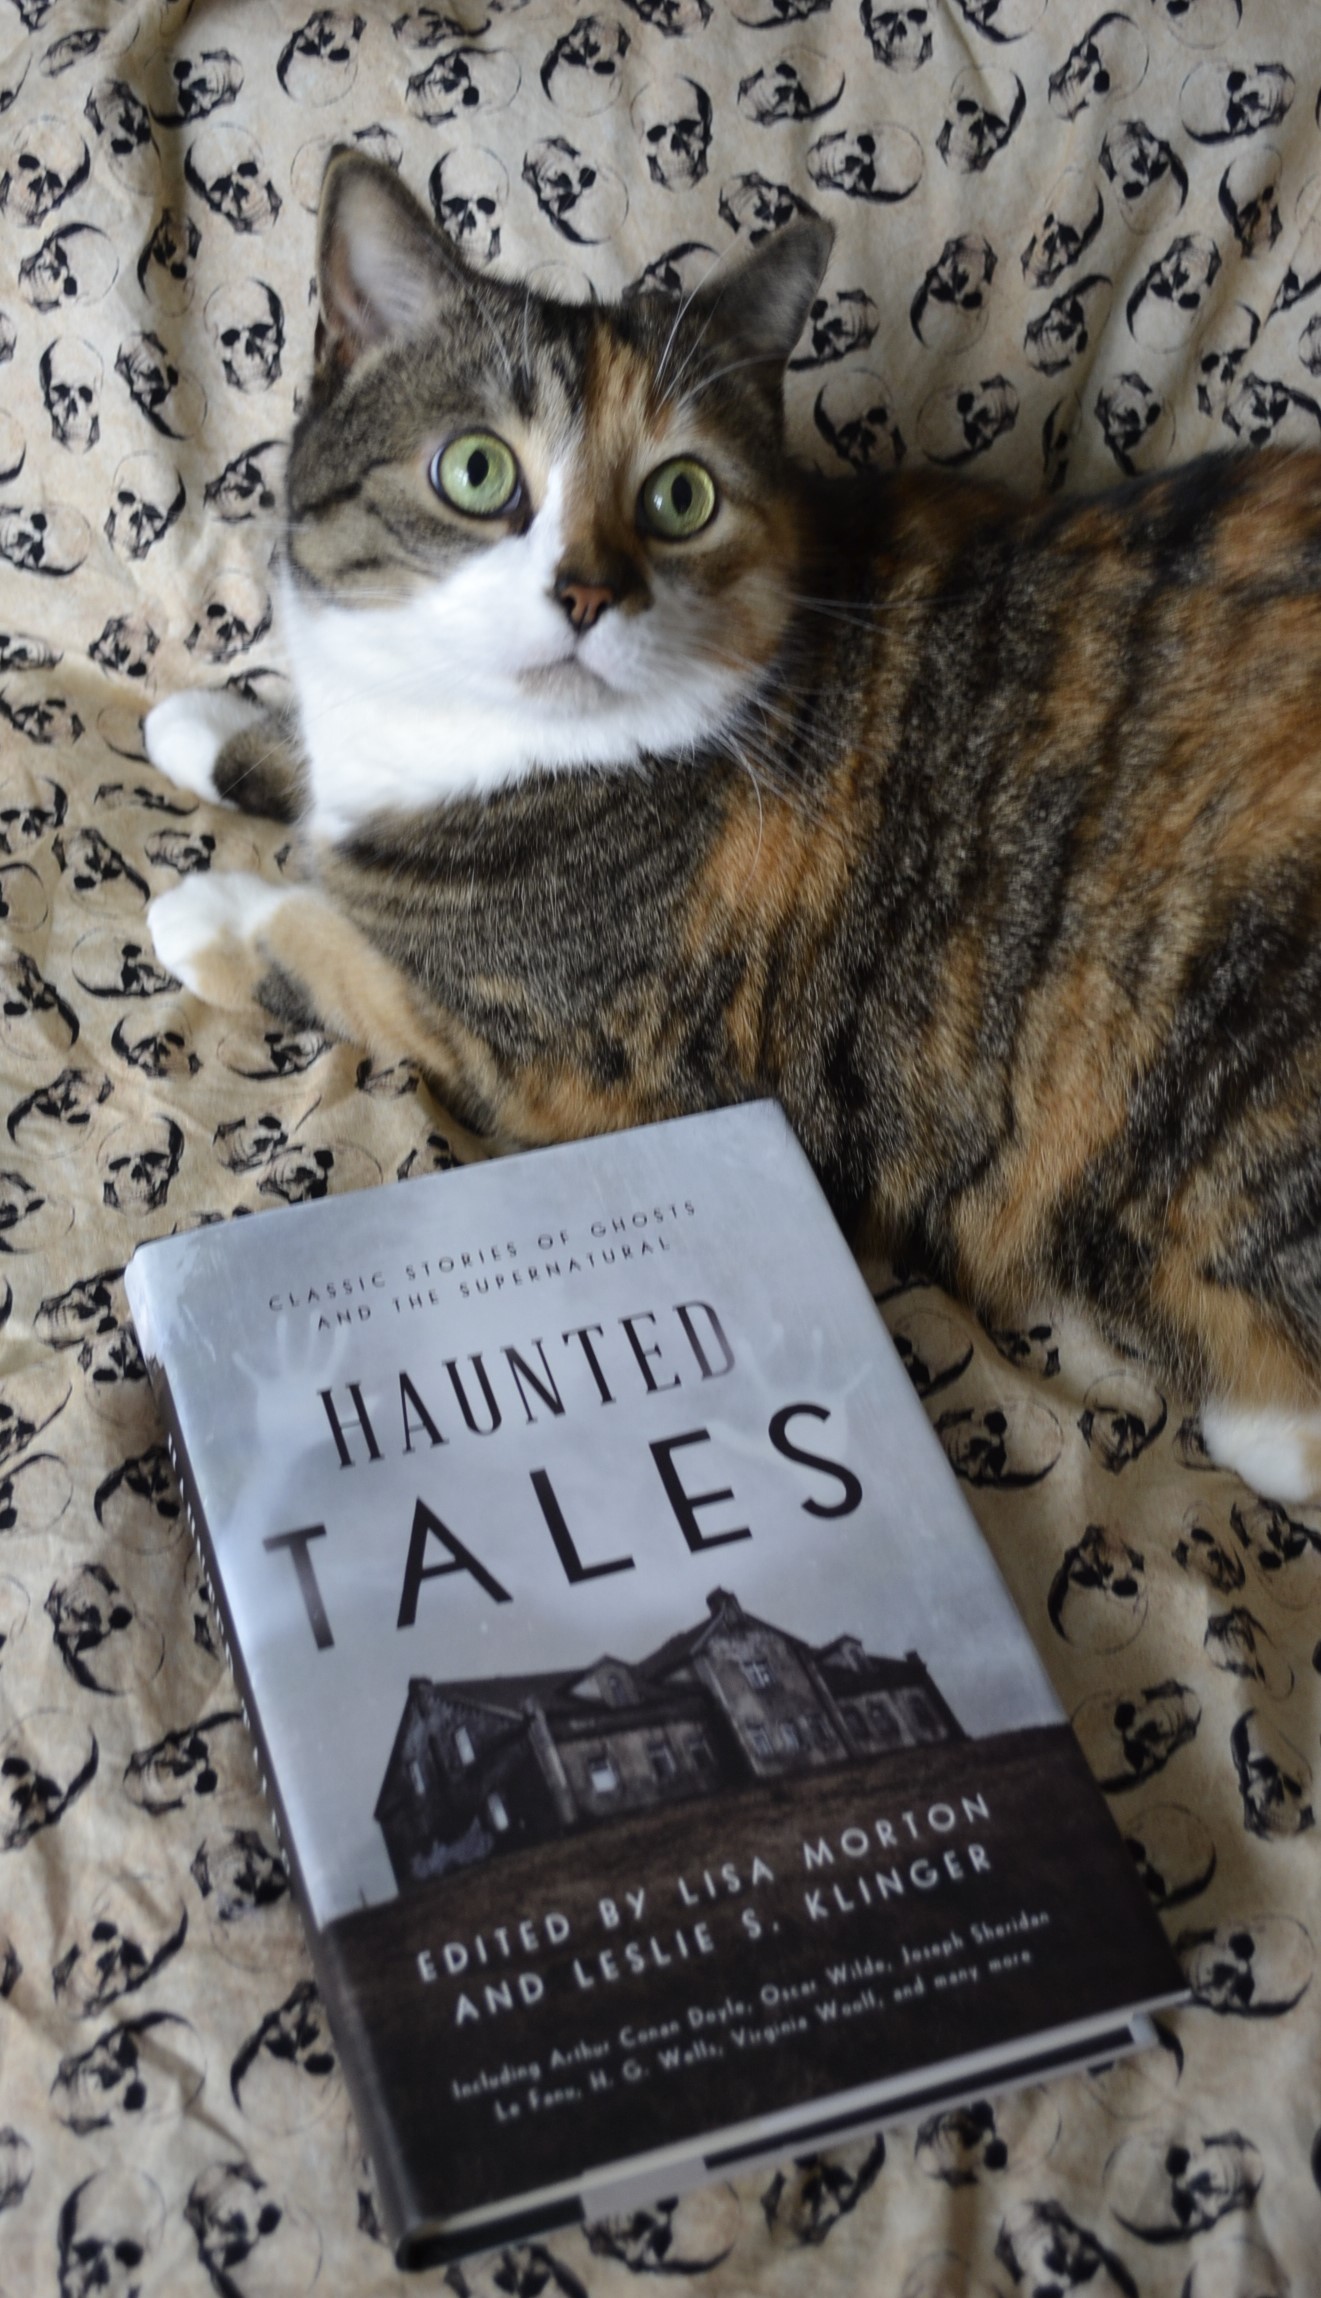 A calico tabby sits primly beside a book. The book is Haunted Tales and it features a spooky house on the grey cover.